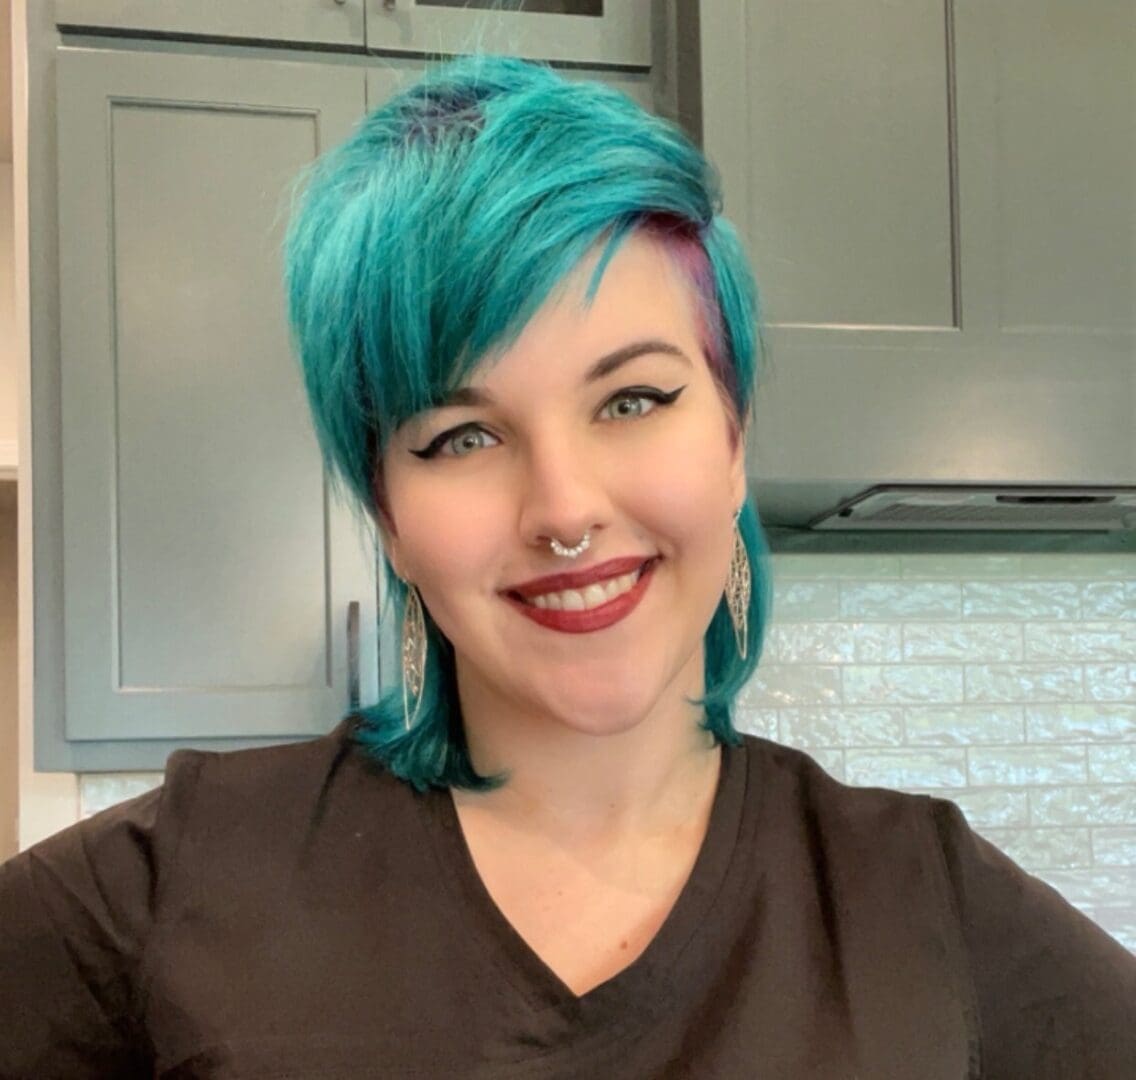 A woman with blue hair is smiling for the camera.